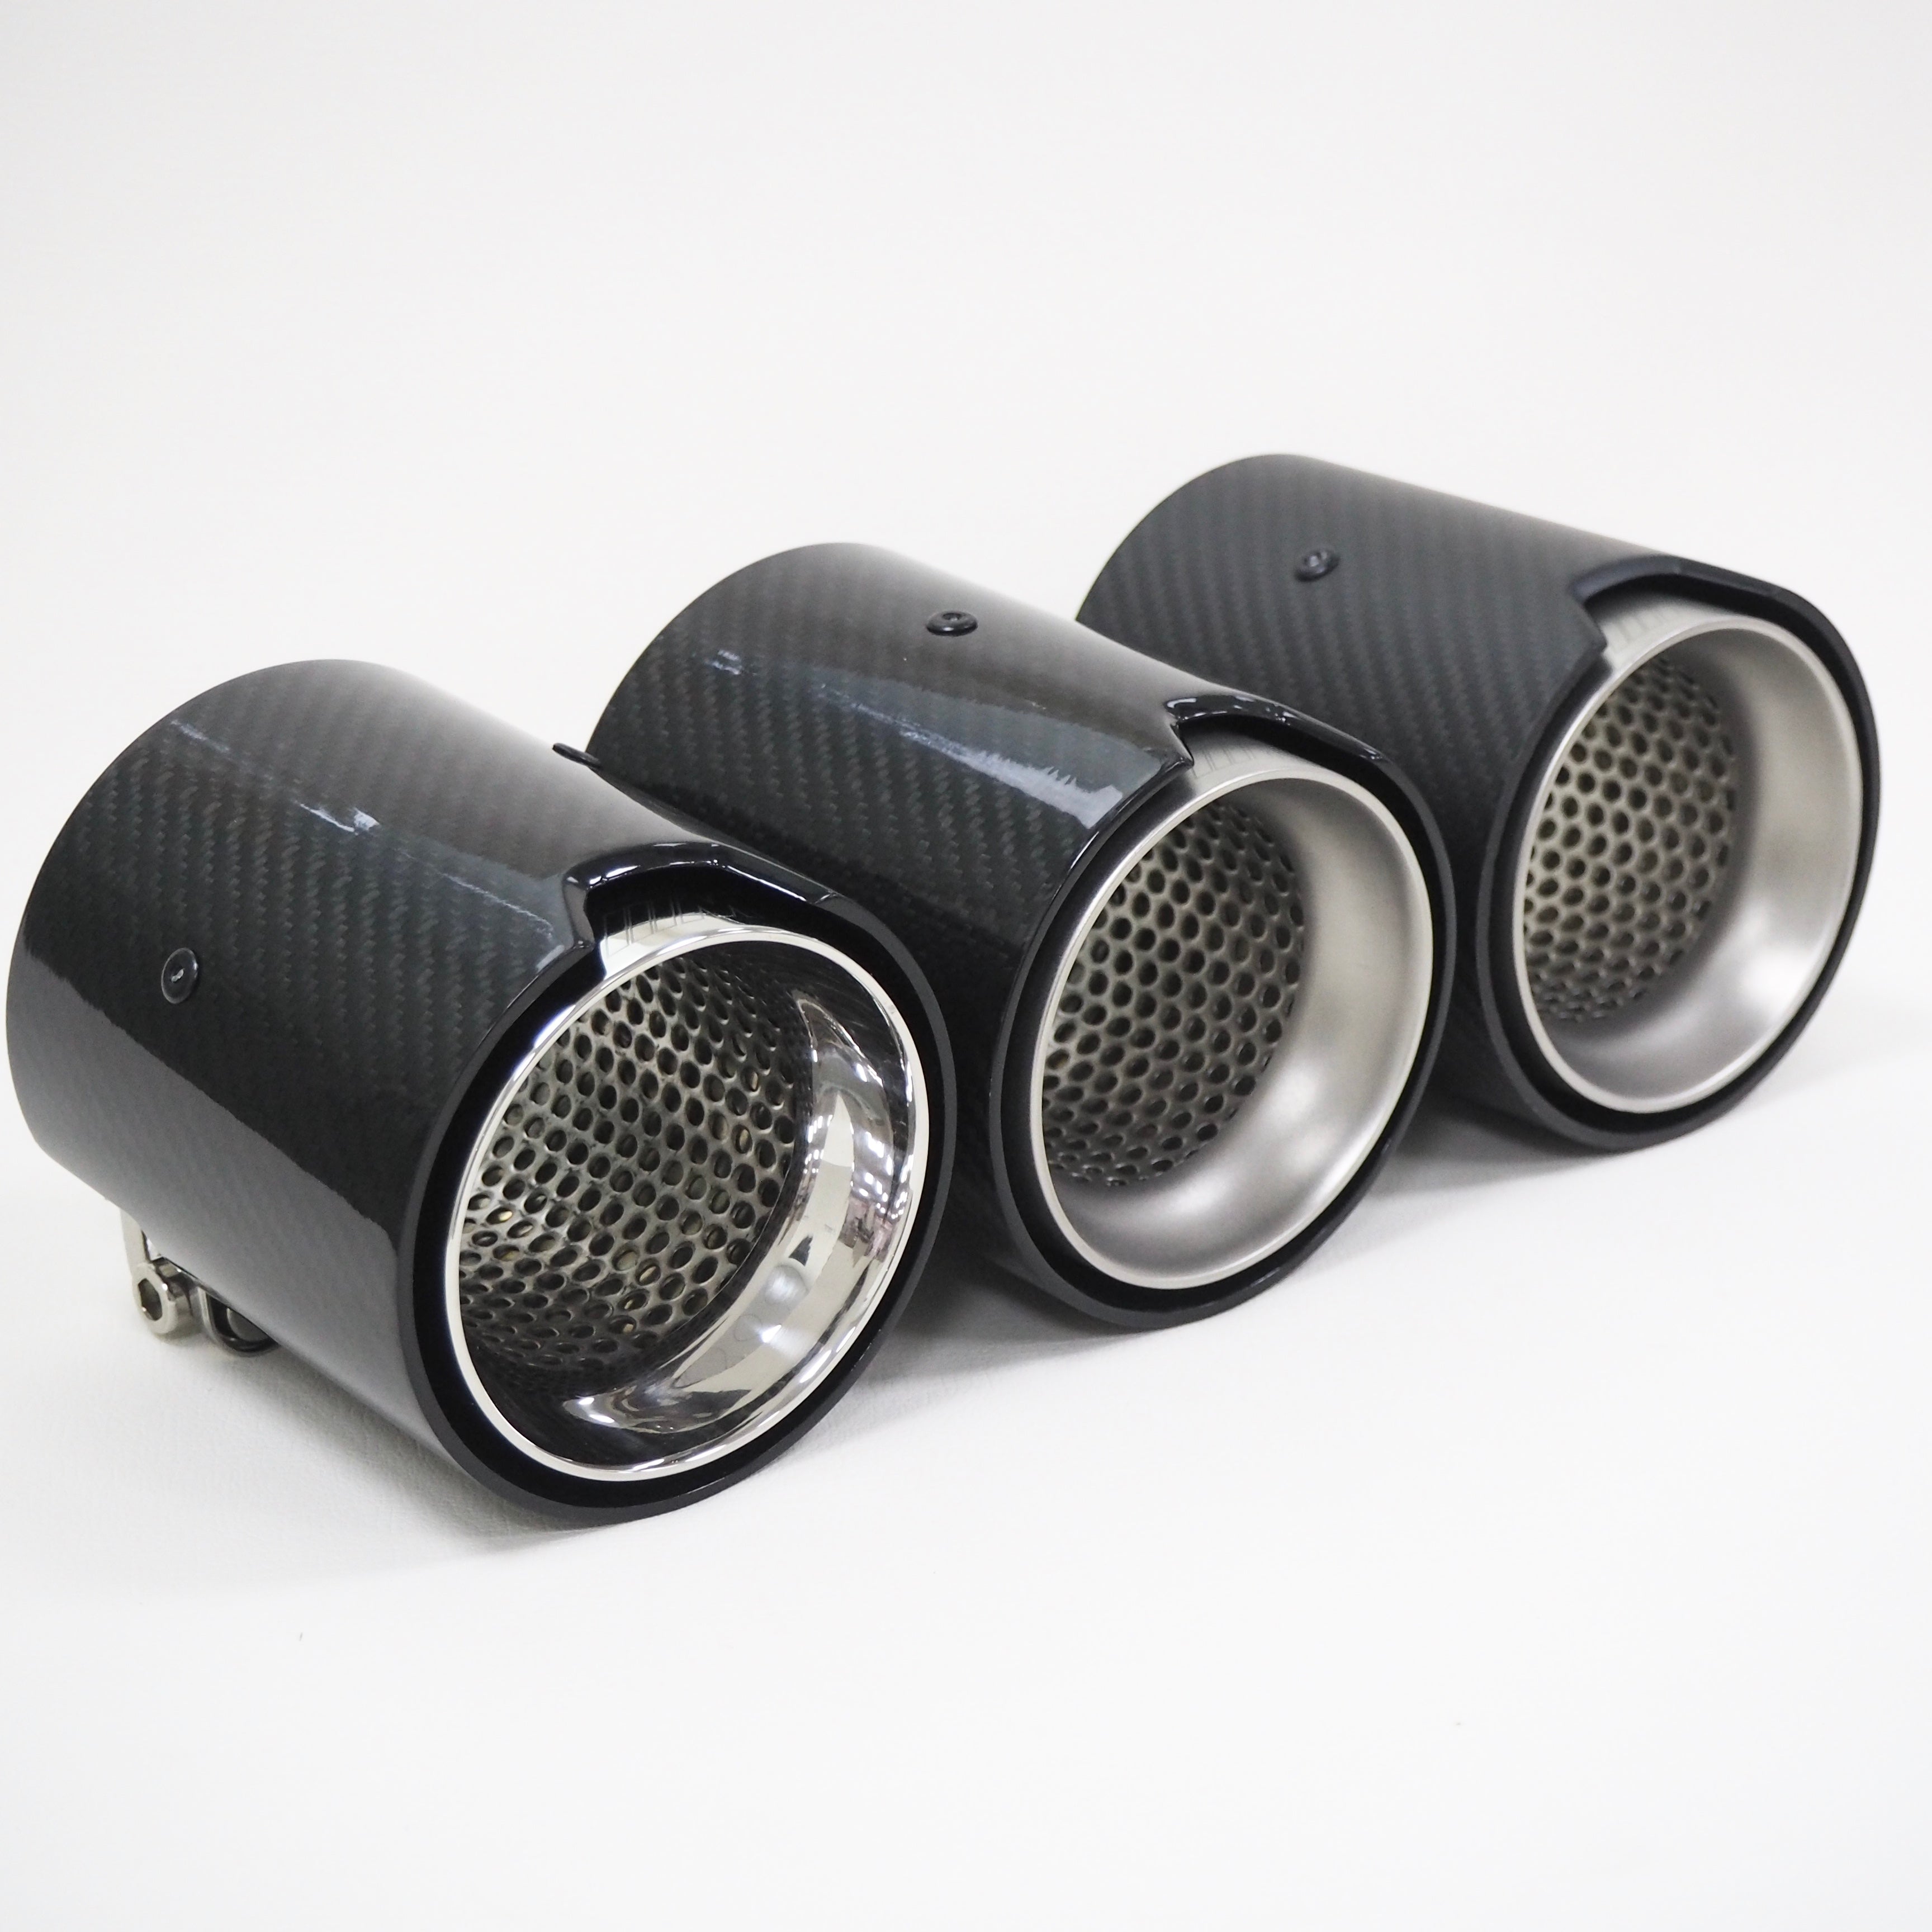 BMW 535I 535D 640I 640D Carbon Fibre M Performance Exhaust Tips - Designed to fit the Standard exhaust systems for the twin outlet exhaust systems on the 35I 40D Model BMWs. This product is manufactured using 304 Stainless steel Coated in black high-temperature paint and Real 2*2 Twill Carbon Fibre Shells. 